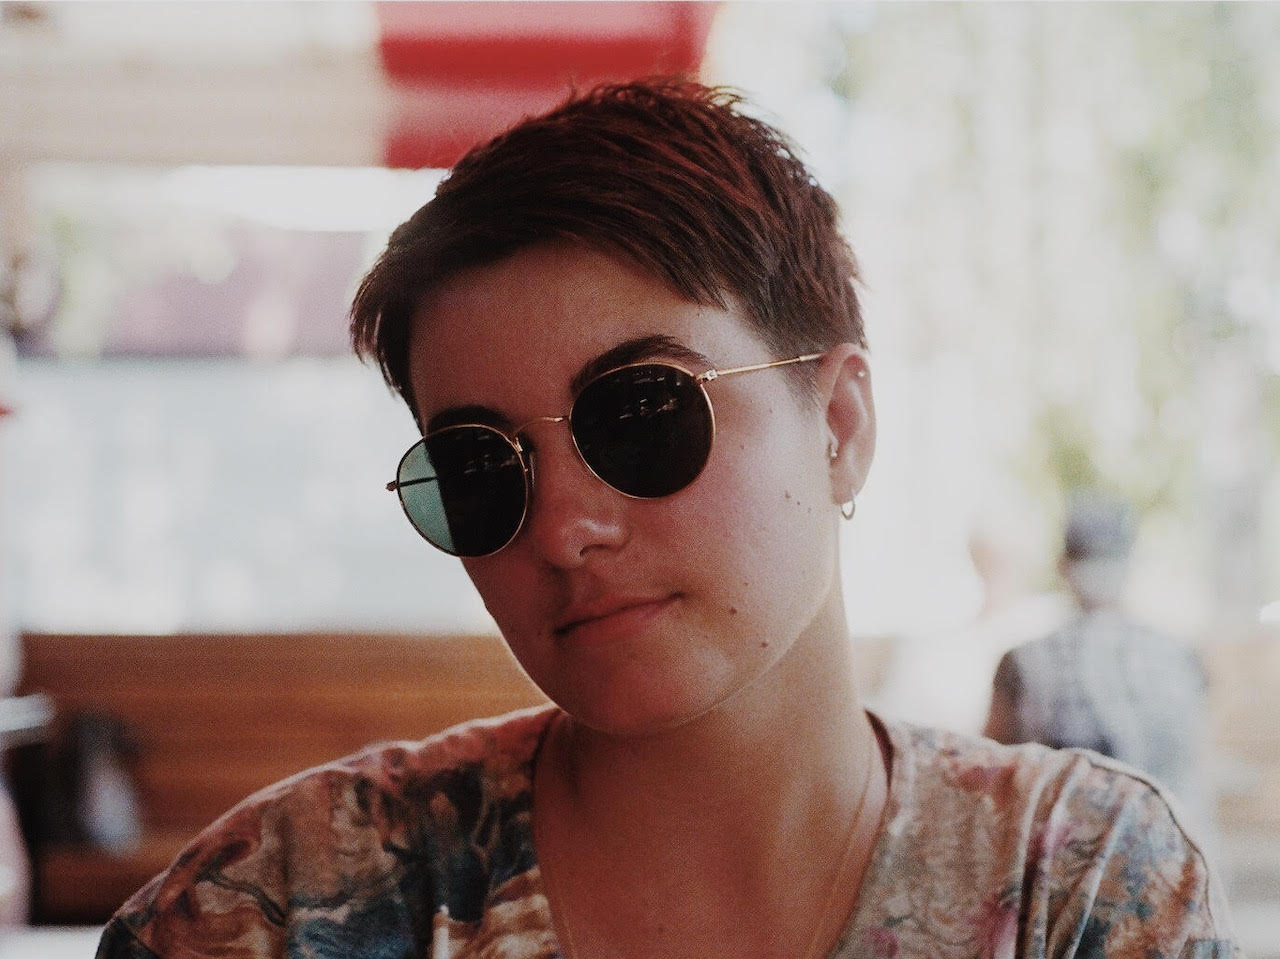 A photo of a woman with short brown hard and gold-rimmed sunglasses